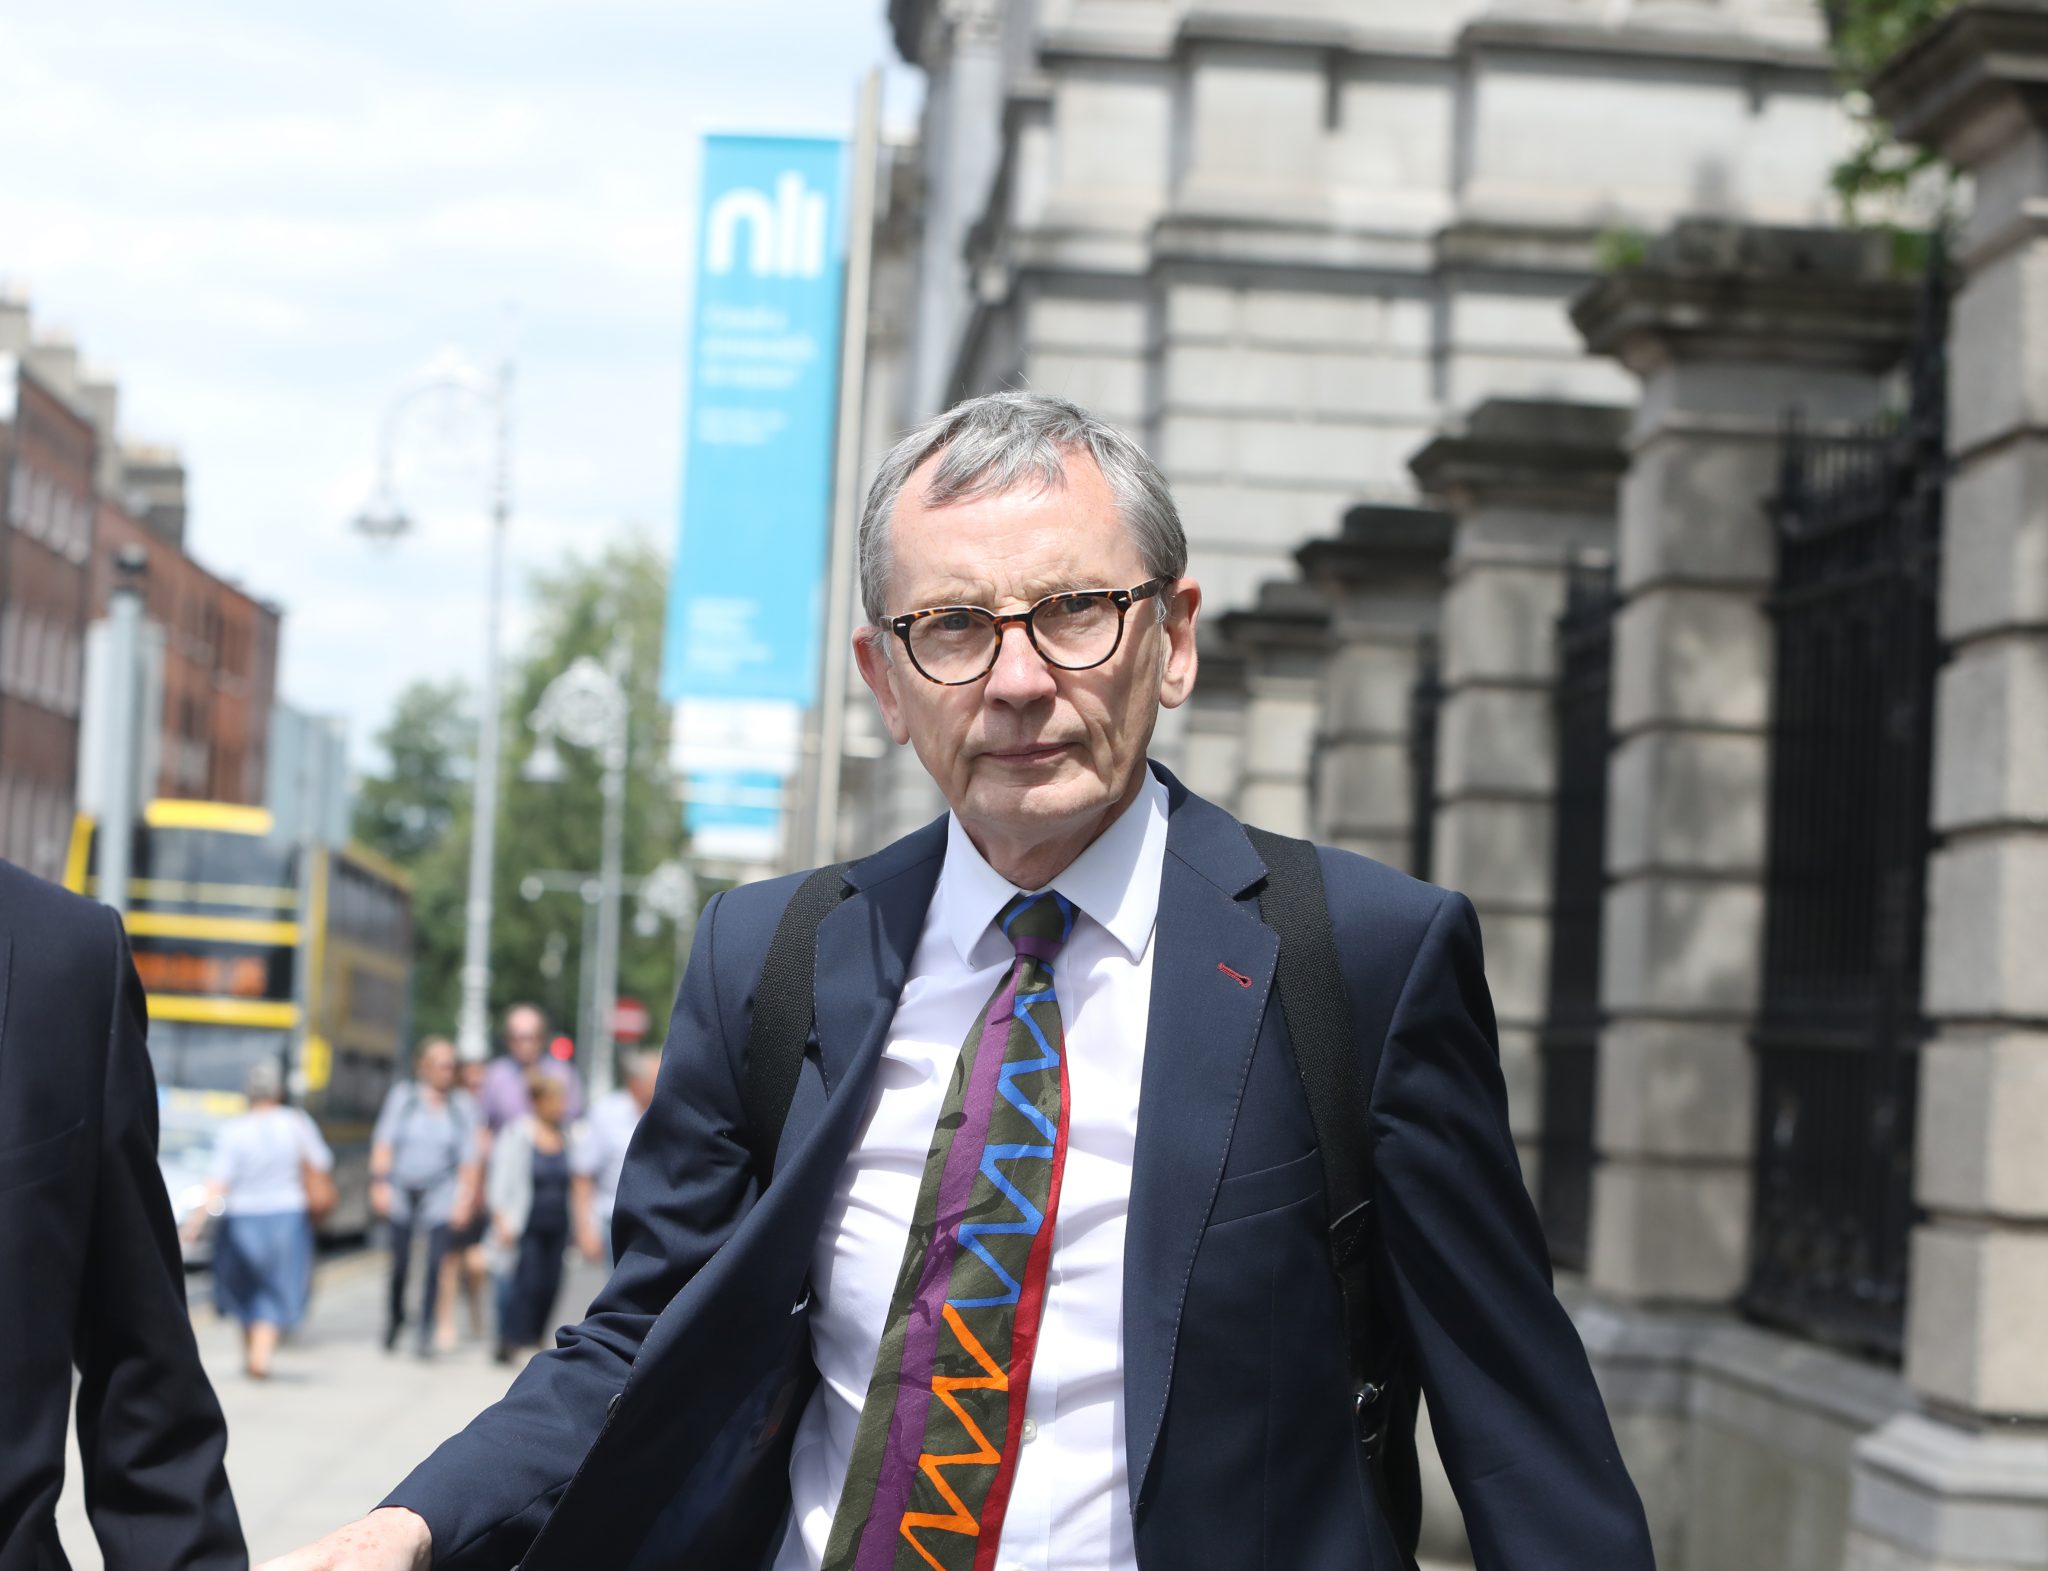 Dr Gabriel Scally arriving at Leinster House to discuss his second CervicalCheck report